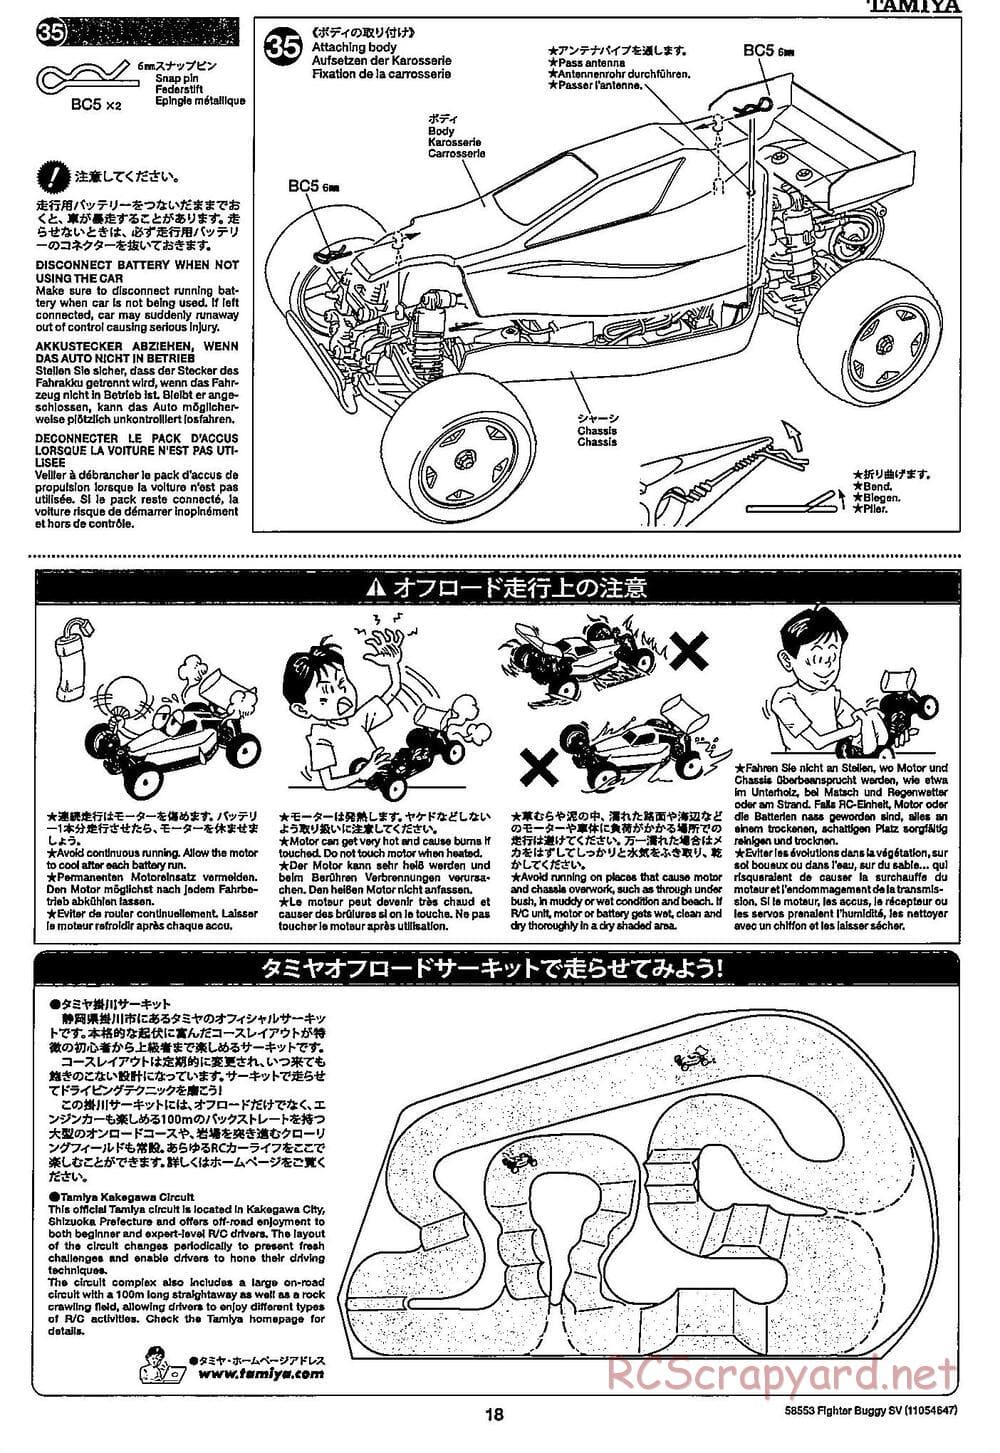 Tamiya - Fighter Buggy SV Chassis - Manual - Page 18